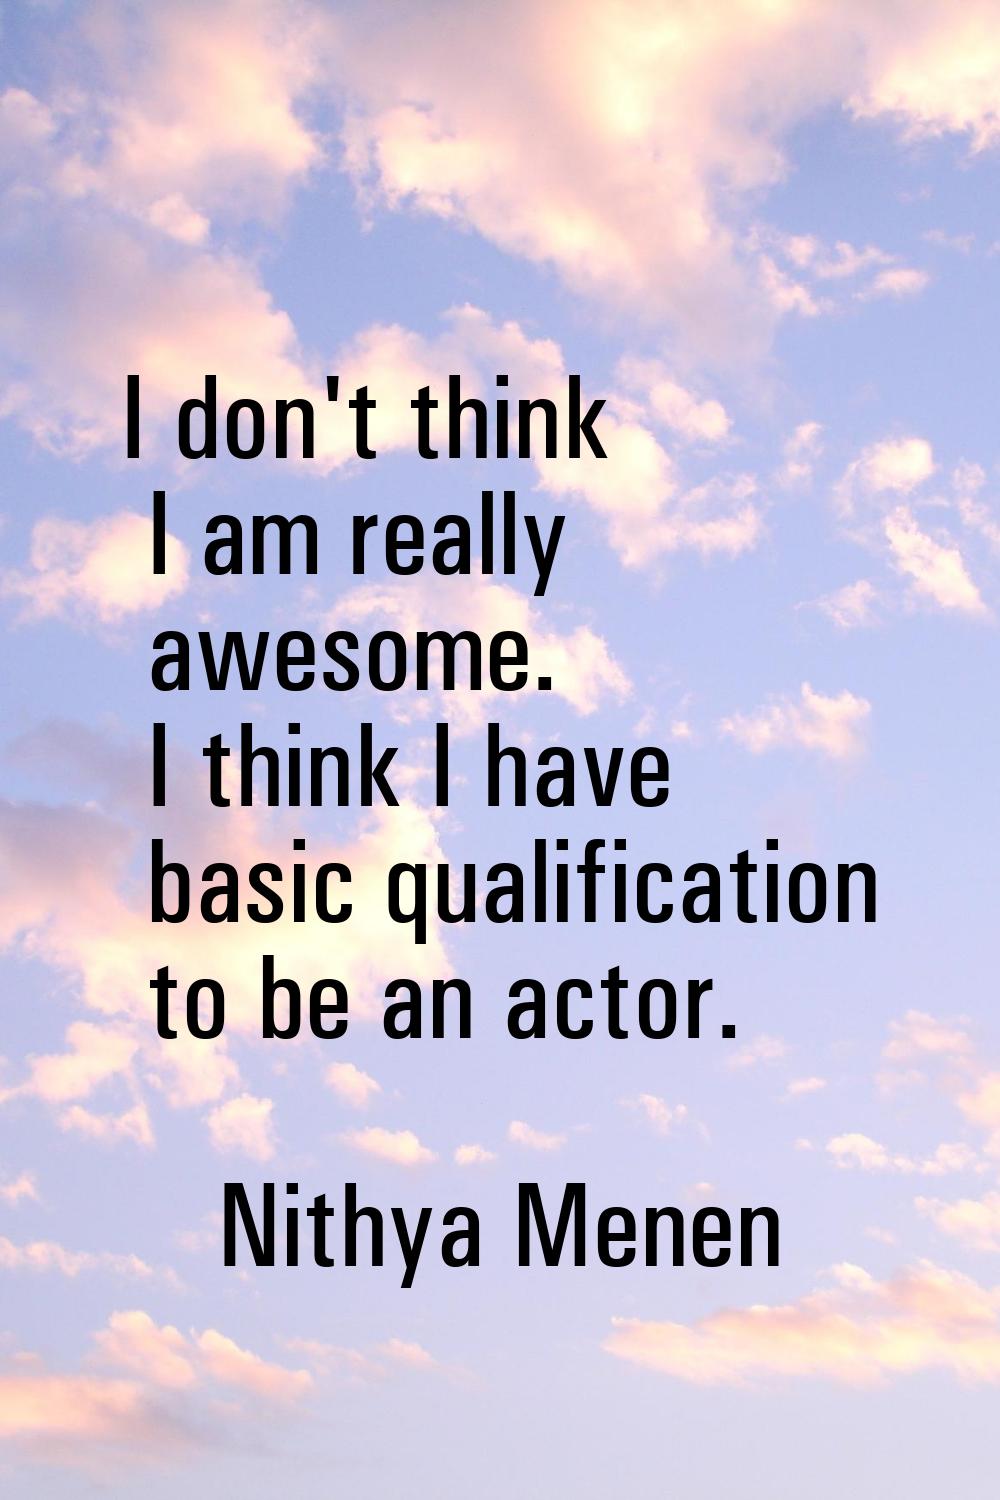 I don't think I am really awesome. I think I have basic qualification to be an actor.